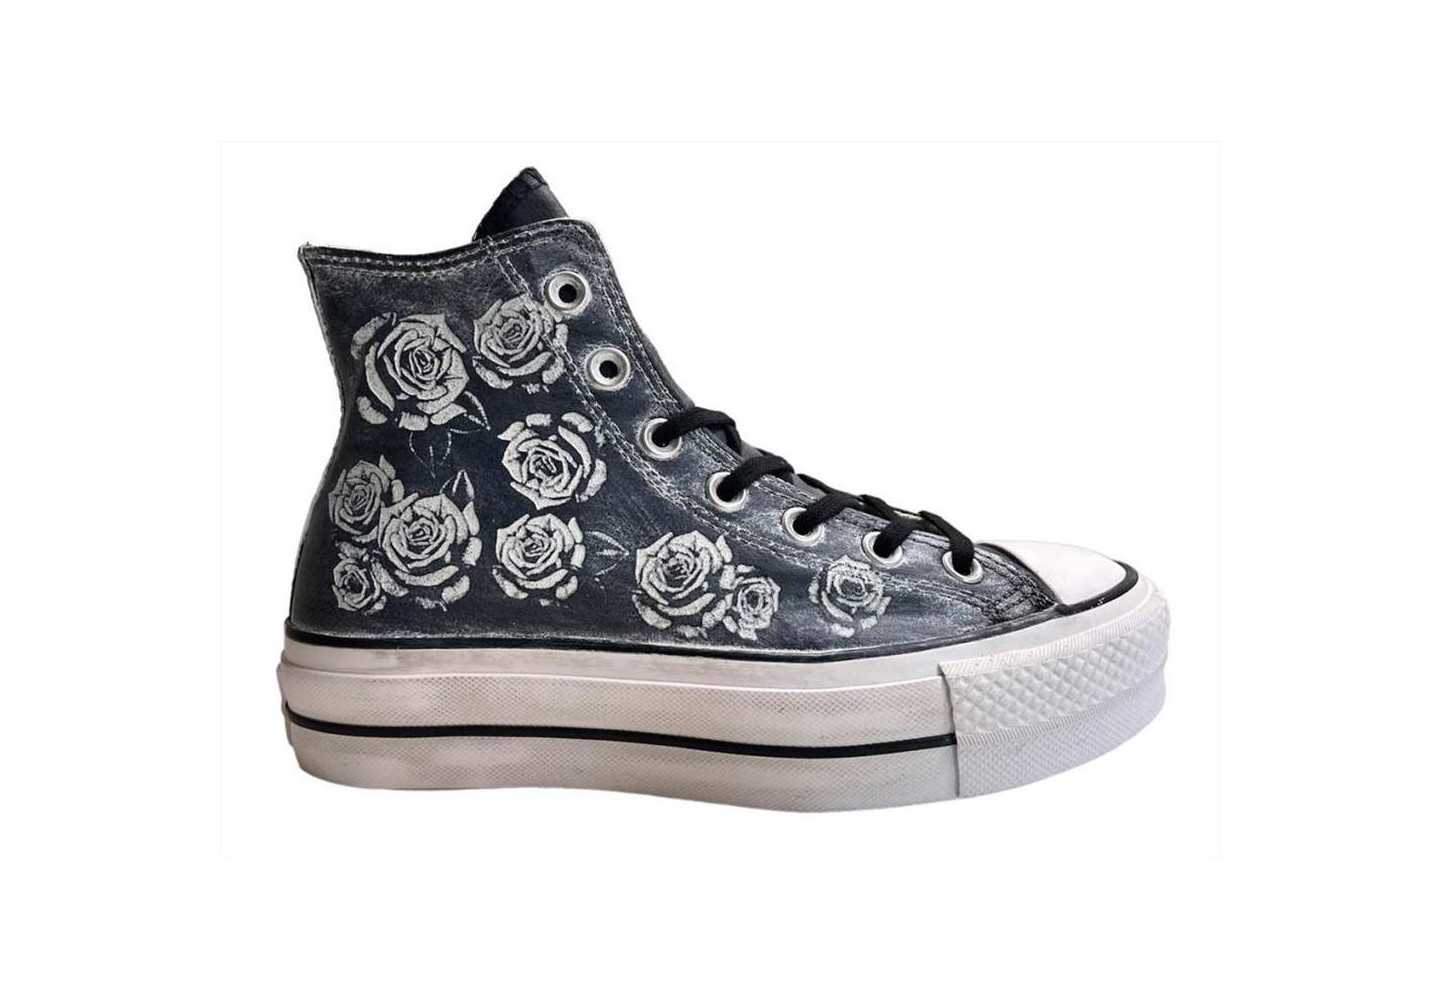 Sneakers limited edition da donna Converse All star Chuck Taylor platform A04311C black/roses